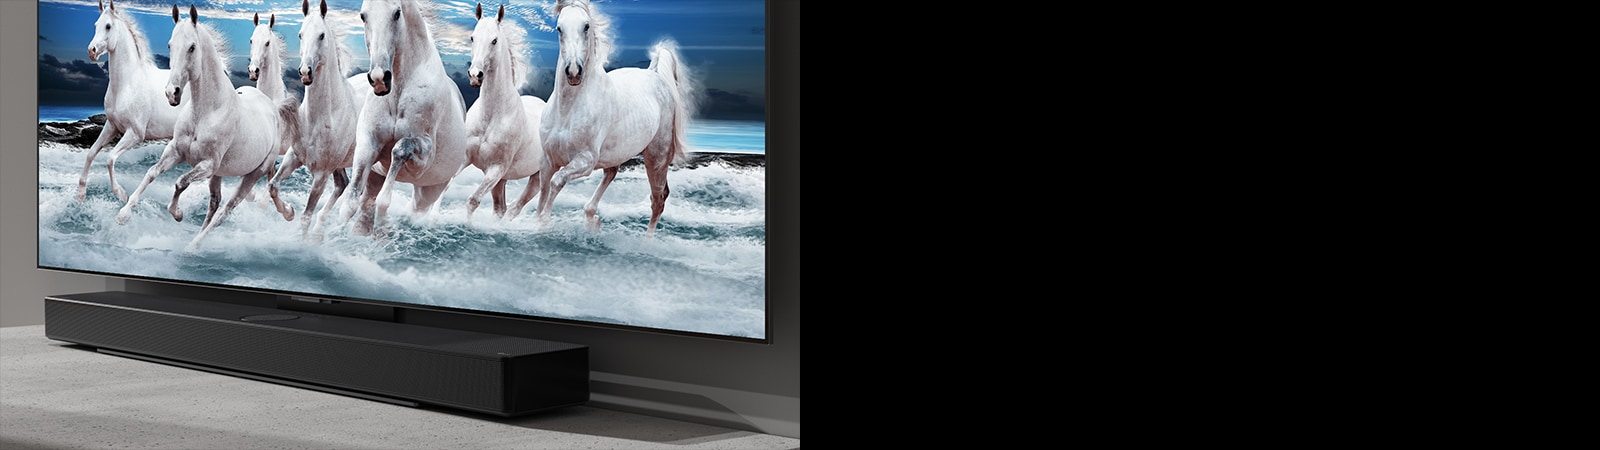 Sound bar and TV are placed on the white table and 7 white horses are shown on the TV.